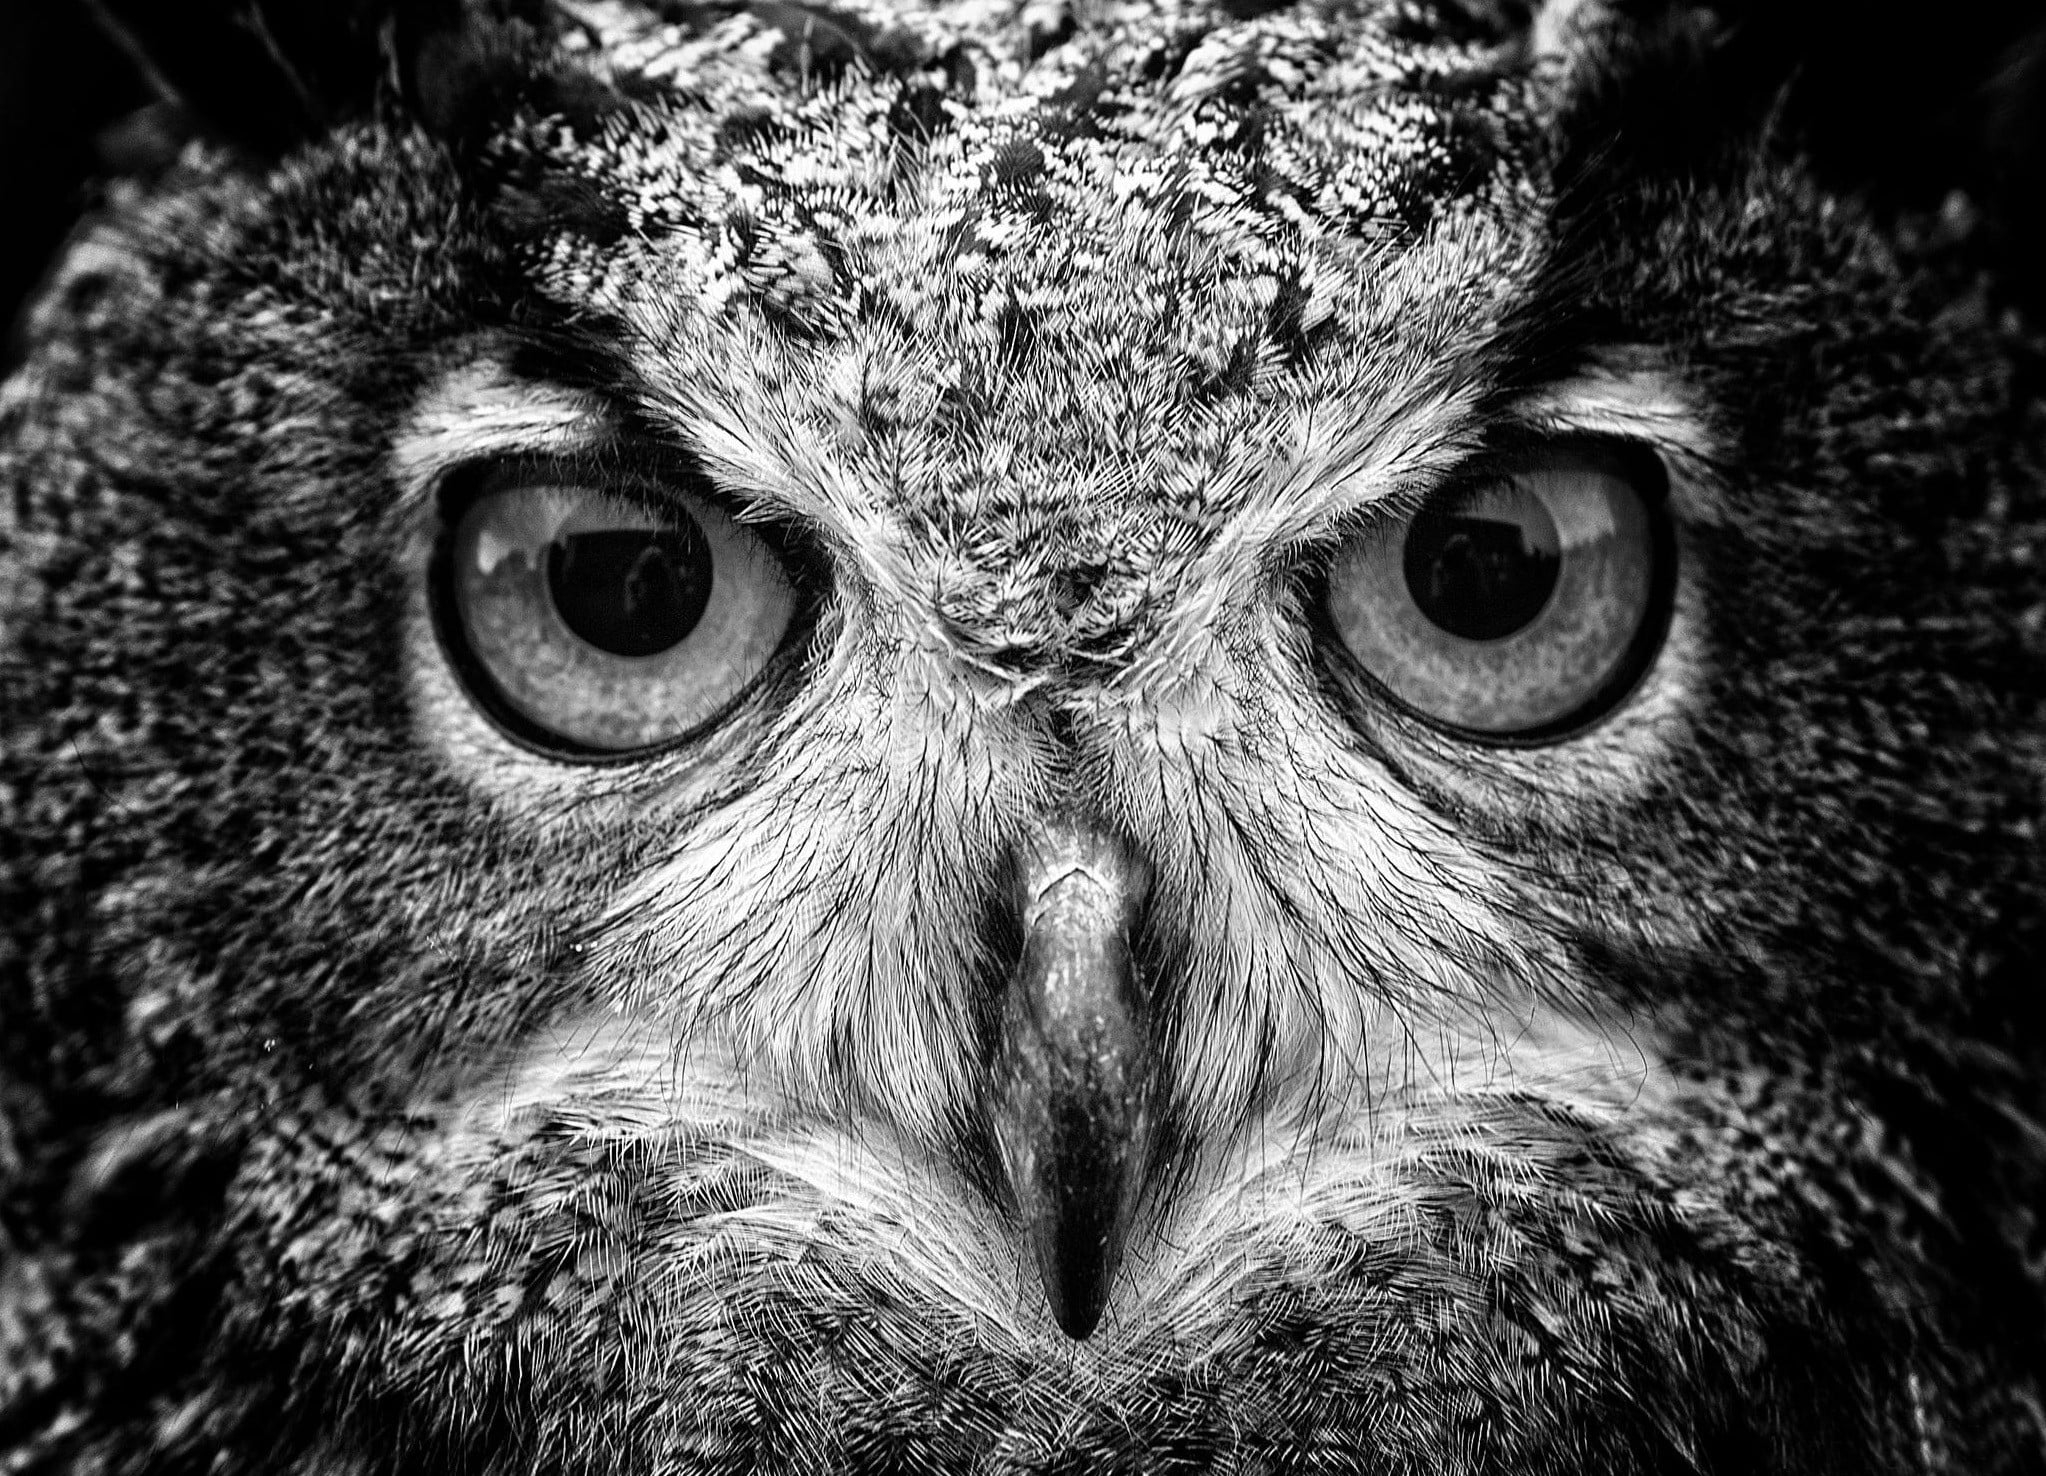 Wallpaper black and gray eagle, grayscale photography of owl, animals, macro